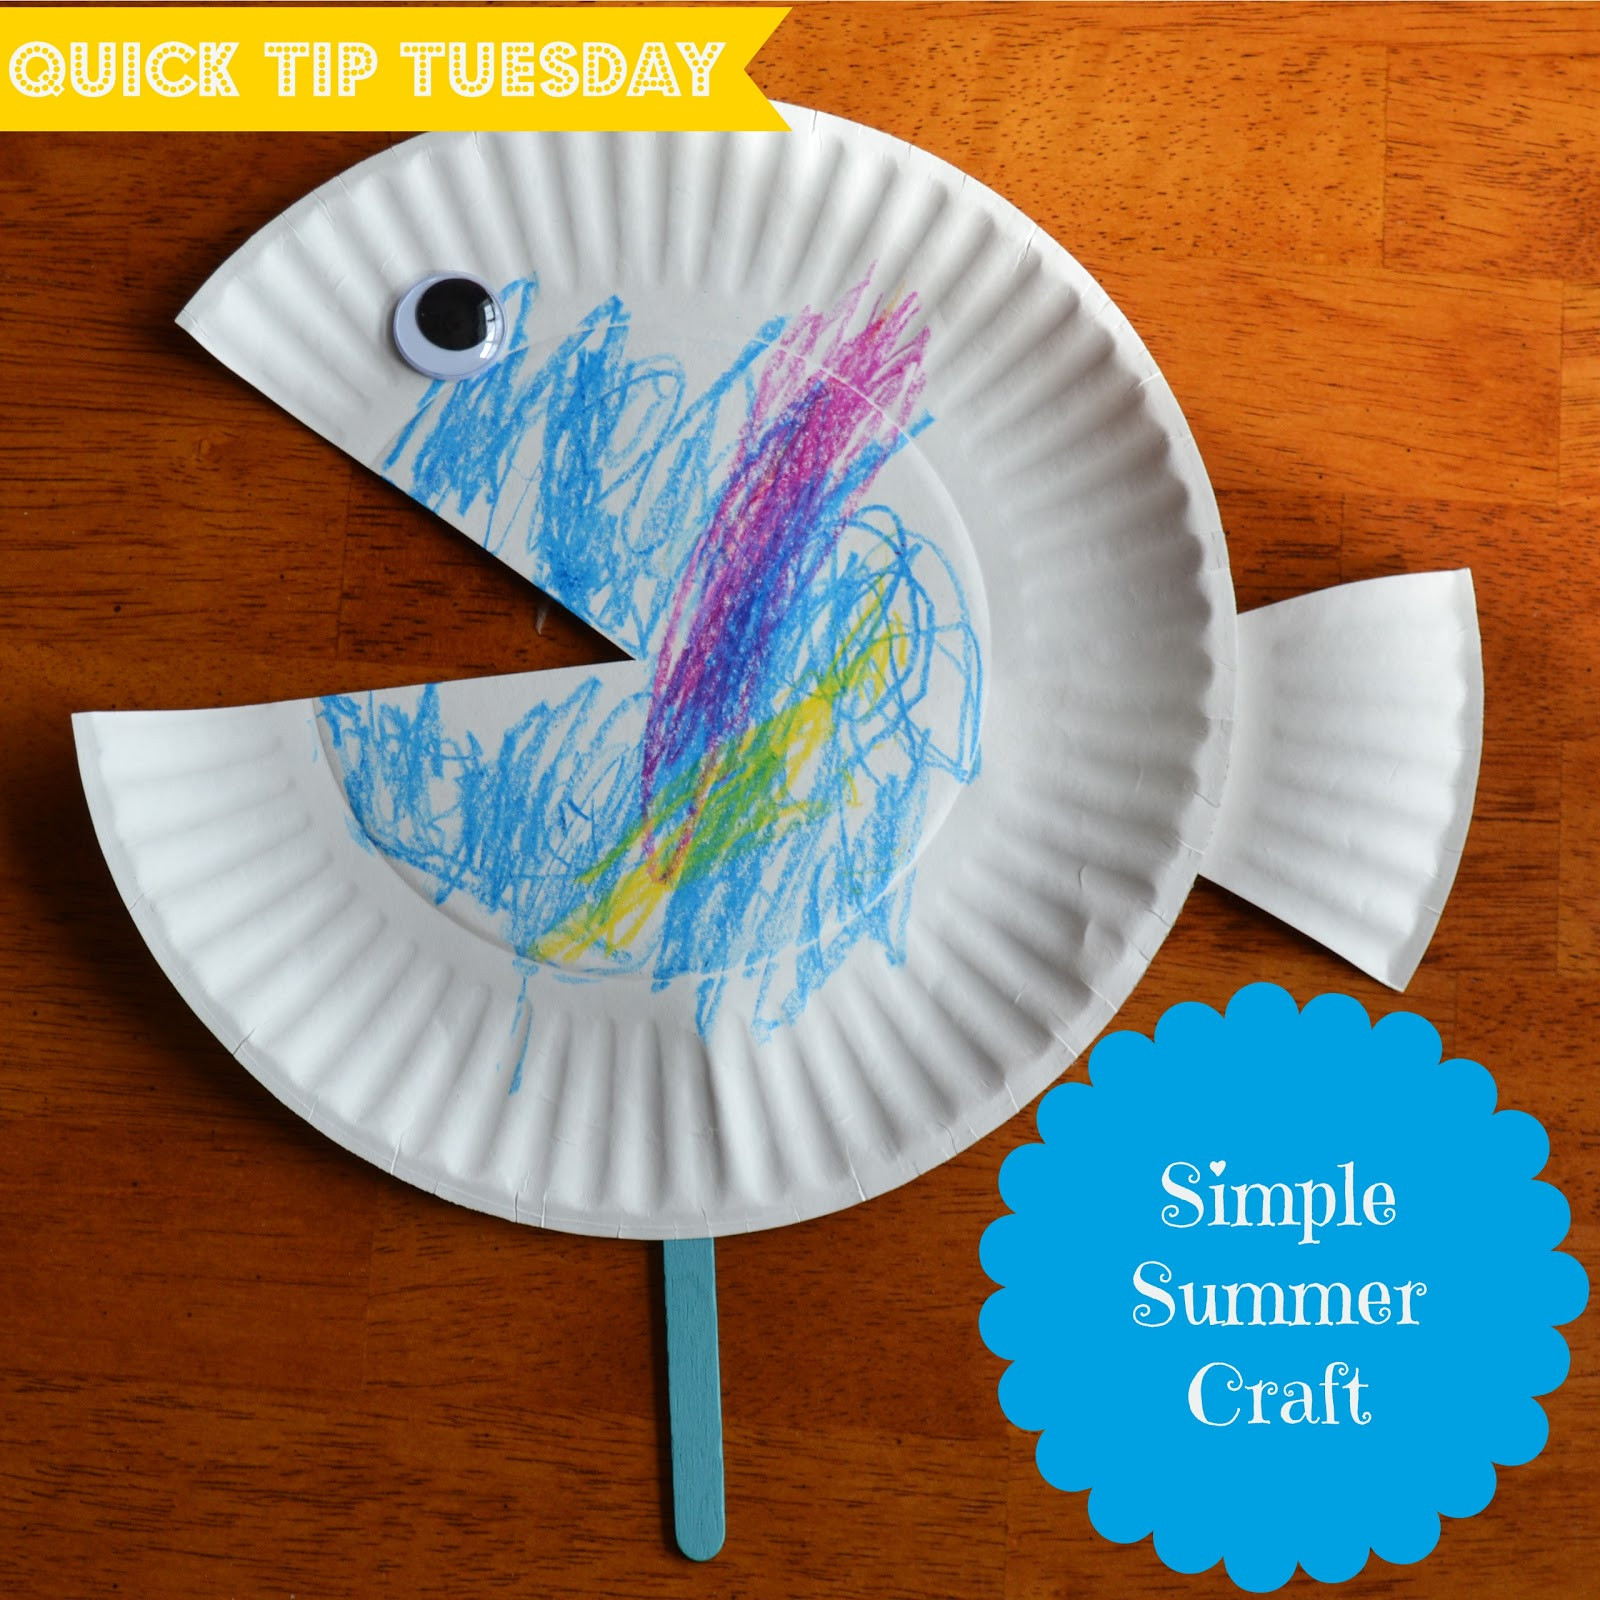 Simple Preschool Crafts
 East Coast Mommy Quick Tip Tuesday 5 Simple Summer Craft